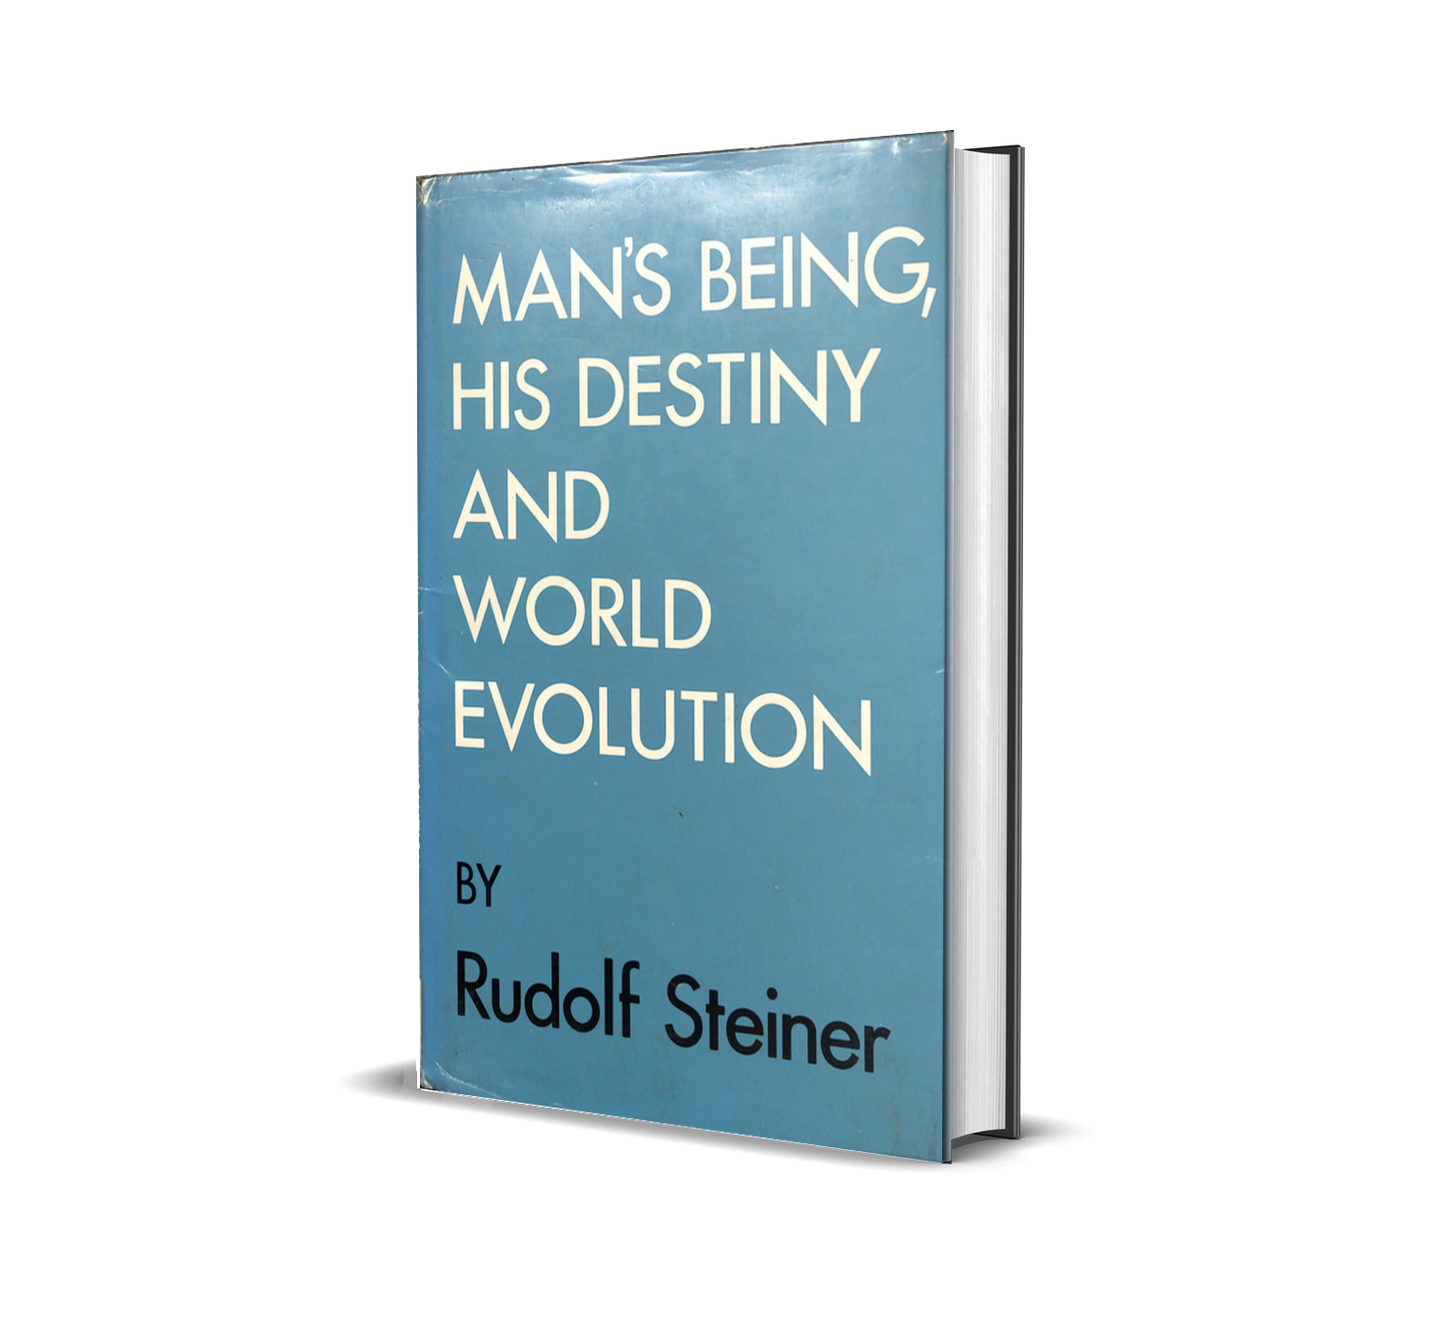 Man's Being, His Destiny and World Evolution